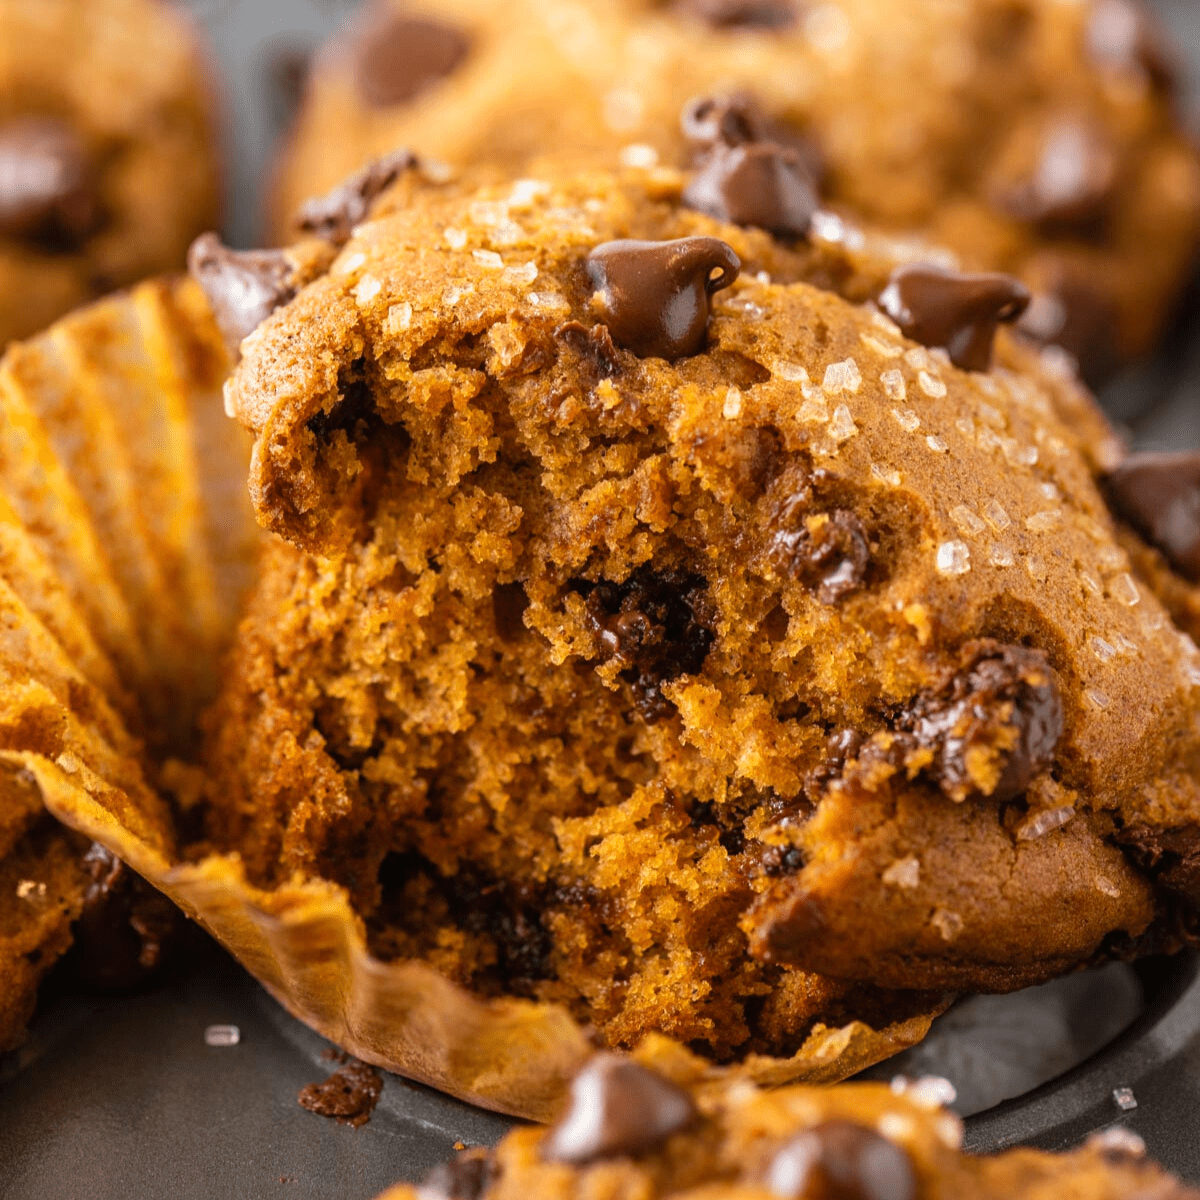 A pumpkin chocolate chip muffin with a bite taken sits in its loosened liner.